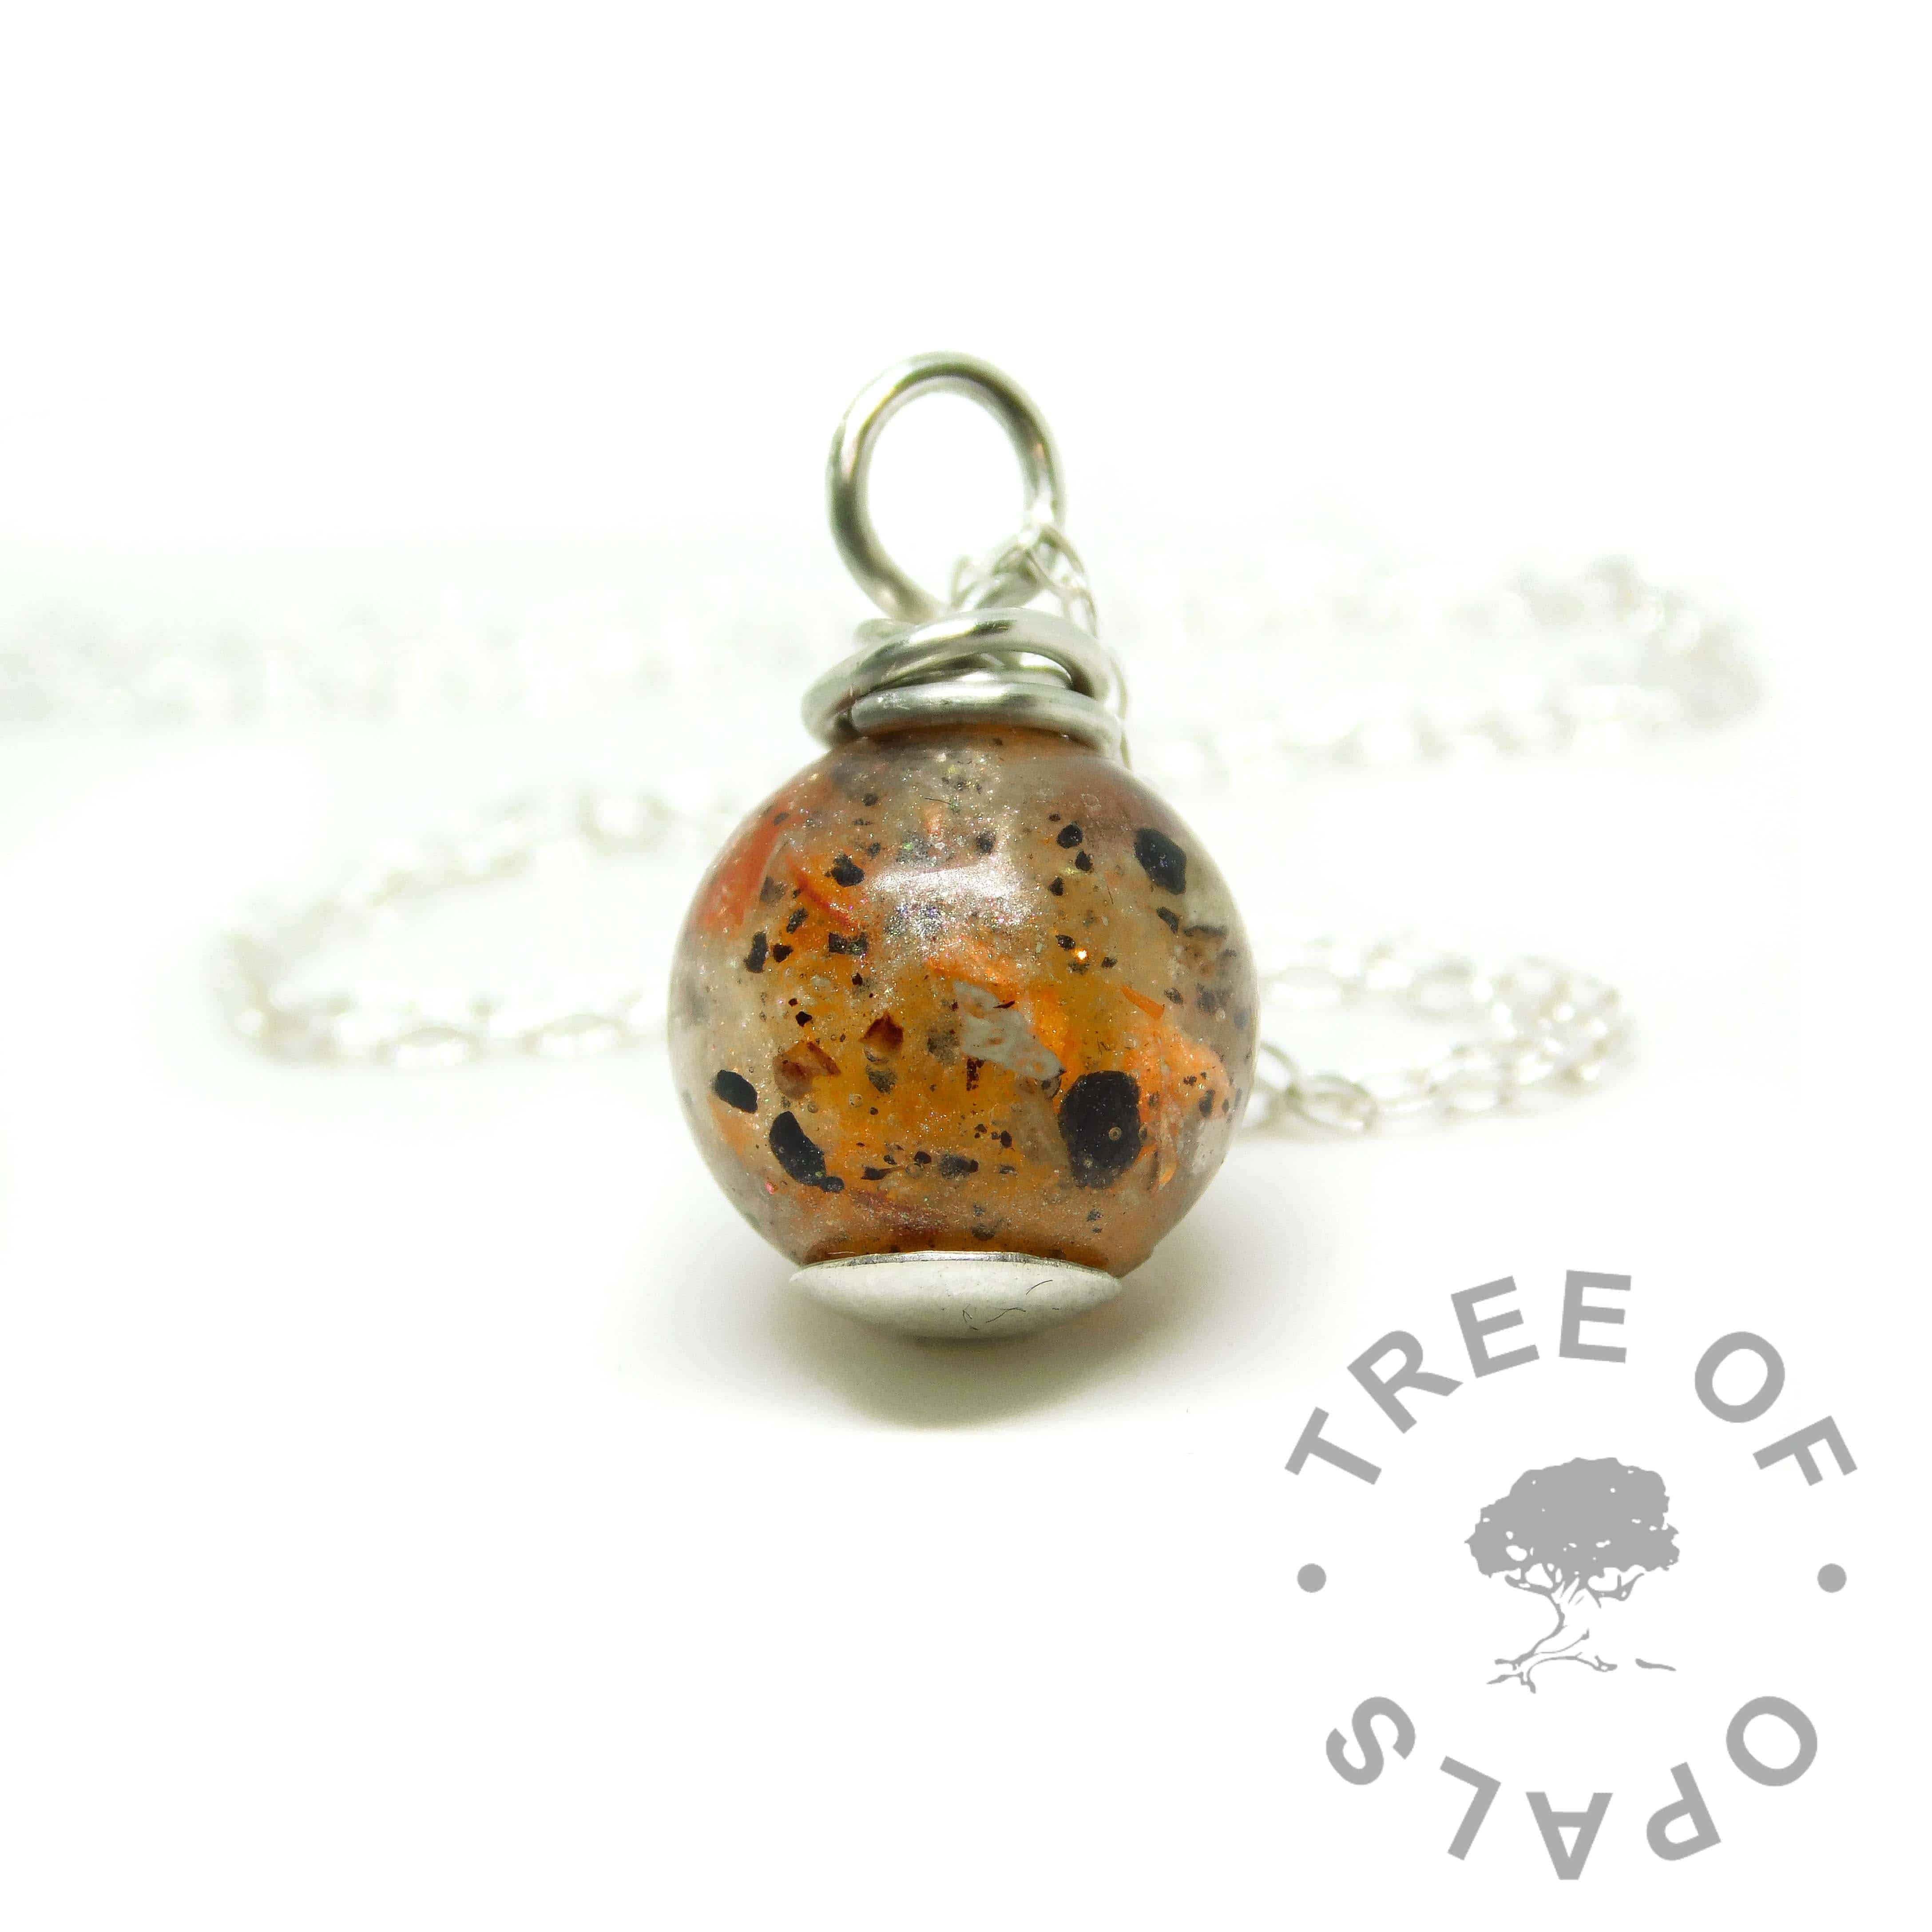 orange umbilical cord pearl, tangerine orange resin sparkle mix, wire wrapped argentium silver setting. Necklace setting